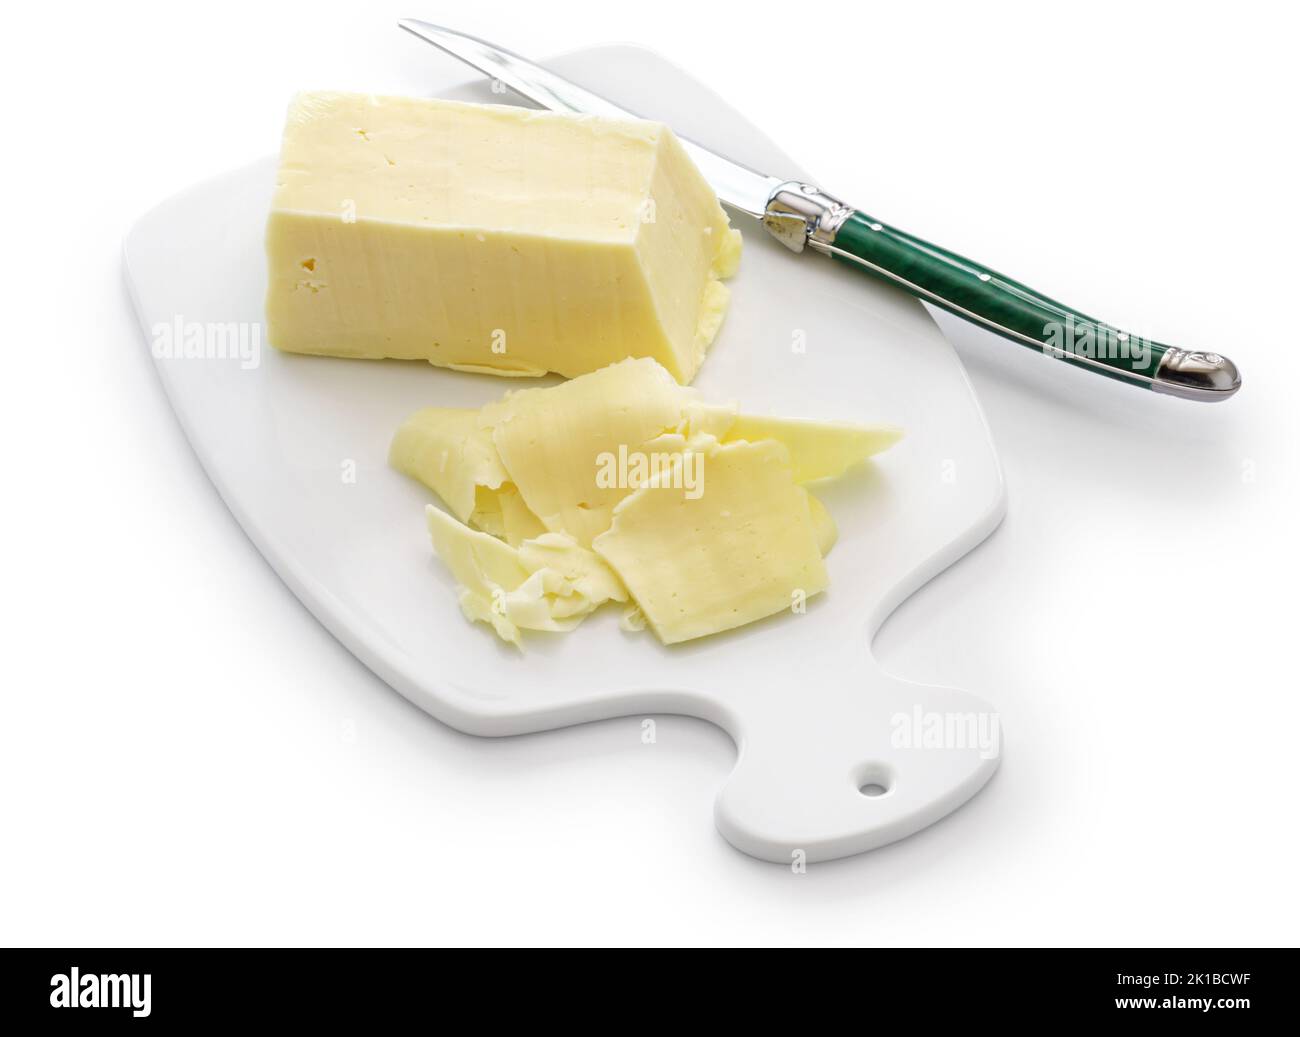 Tomme fraîche de l'Aubrac, this cheese is Ingredients for Aligot, a traditional French dish. Stock Photo